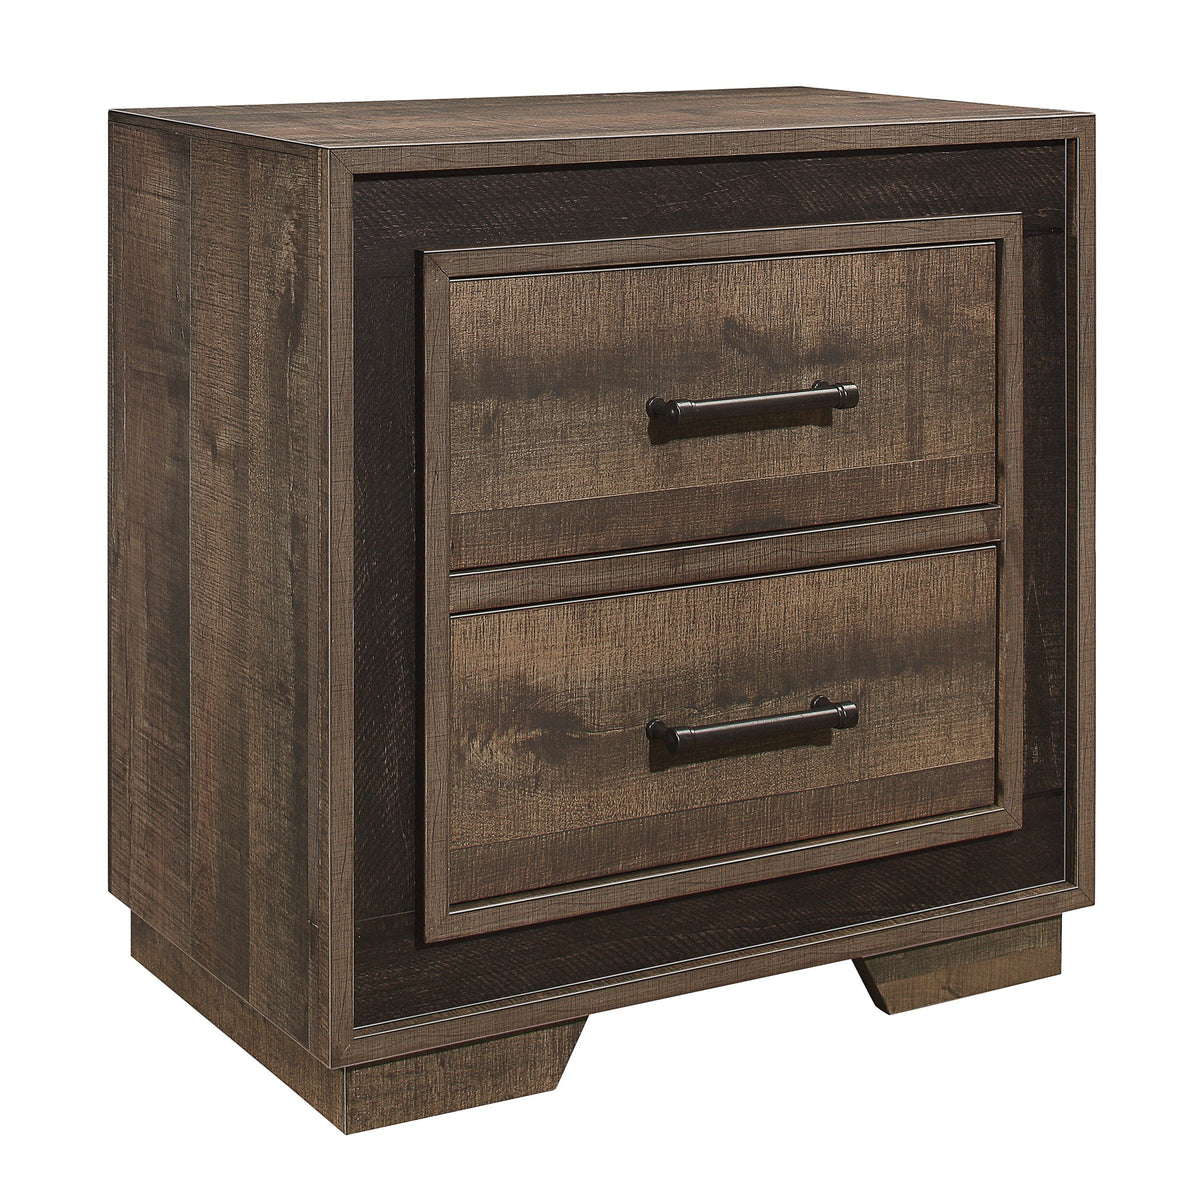 Wooden Nightstand with Sled Base and Metal Bar Pulls, Brown - BM222691